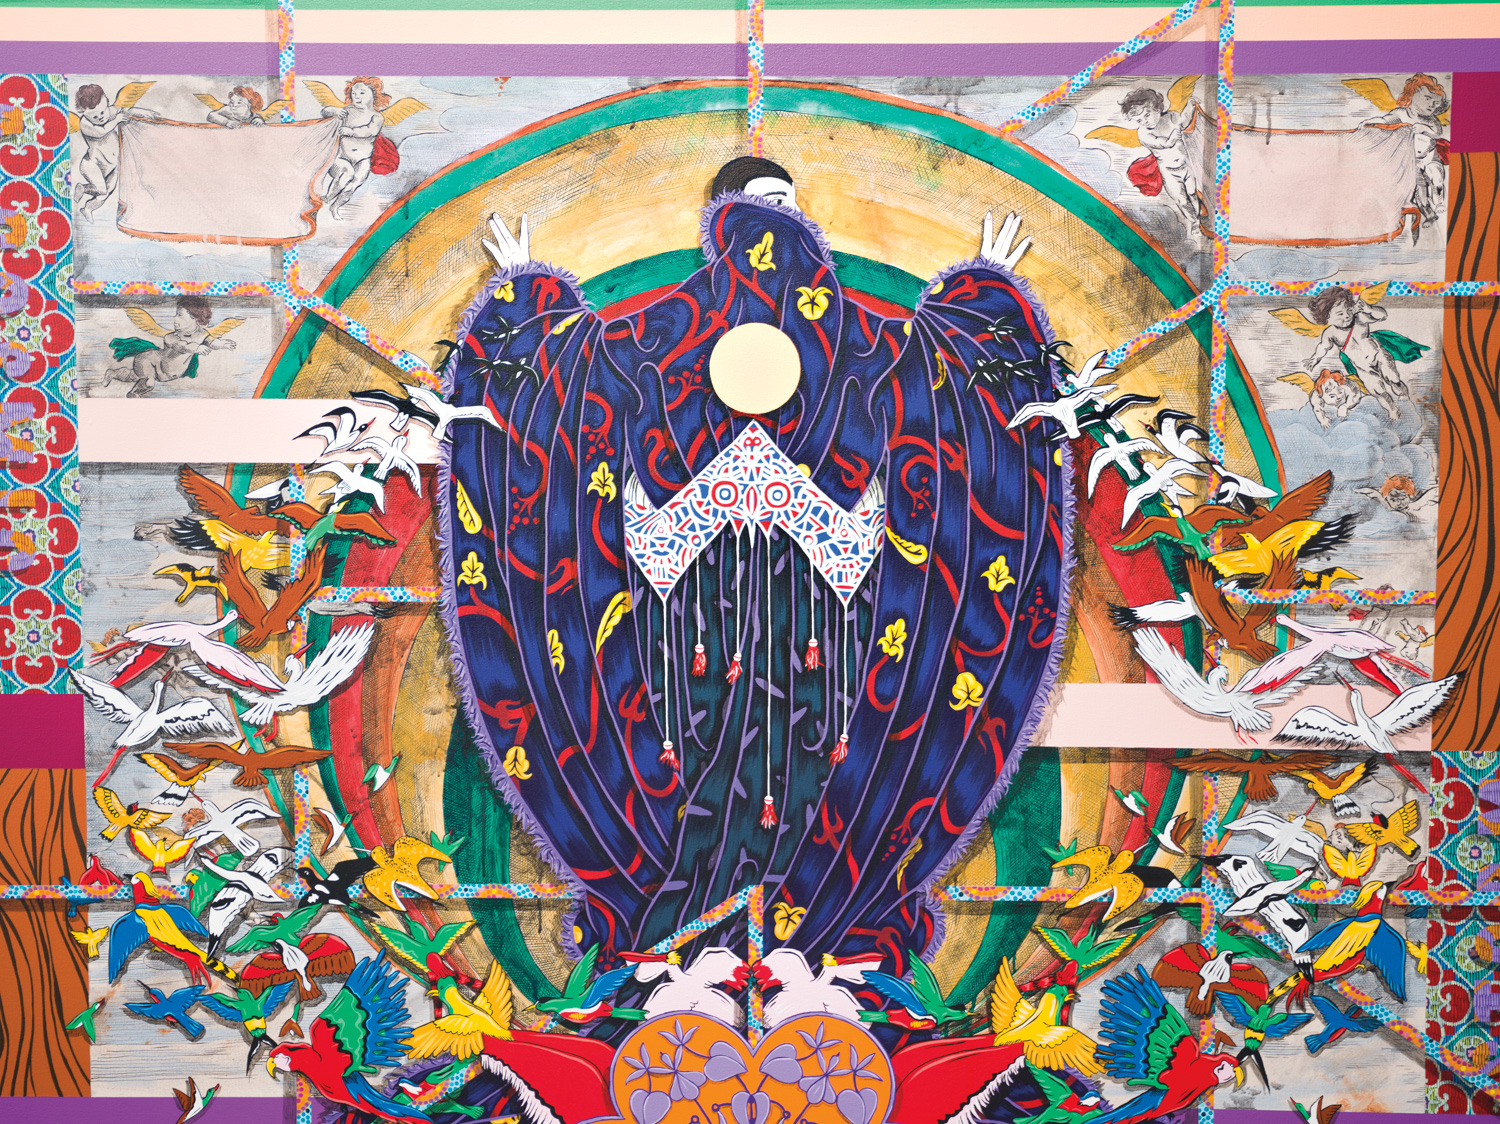 Painting by Amir H. Fallah showing a figure shrouded in a purple robe, surrounded by birds and rings of color